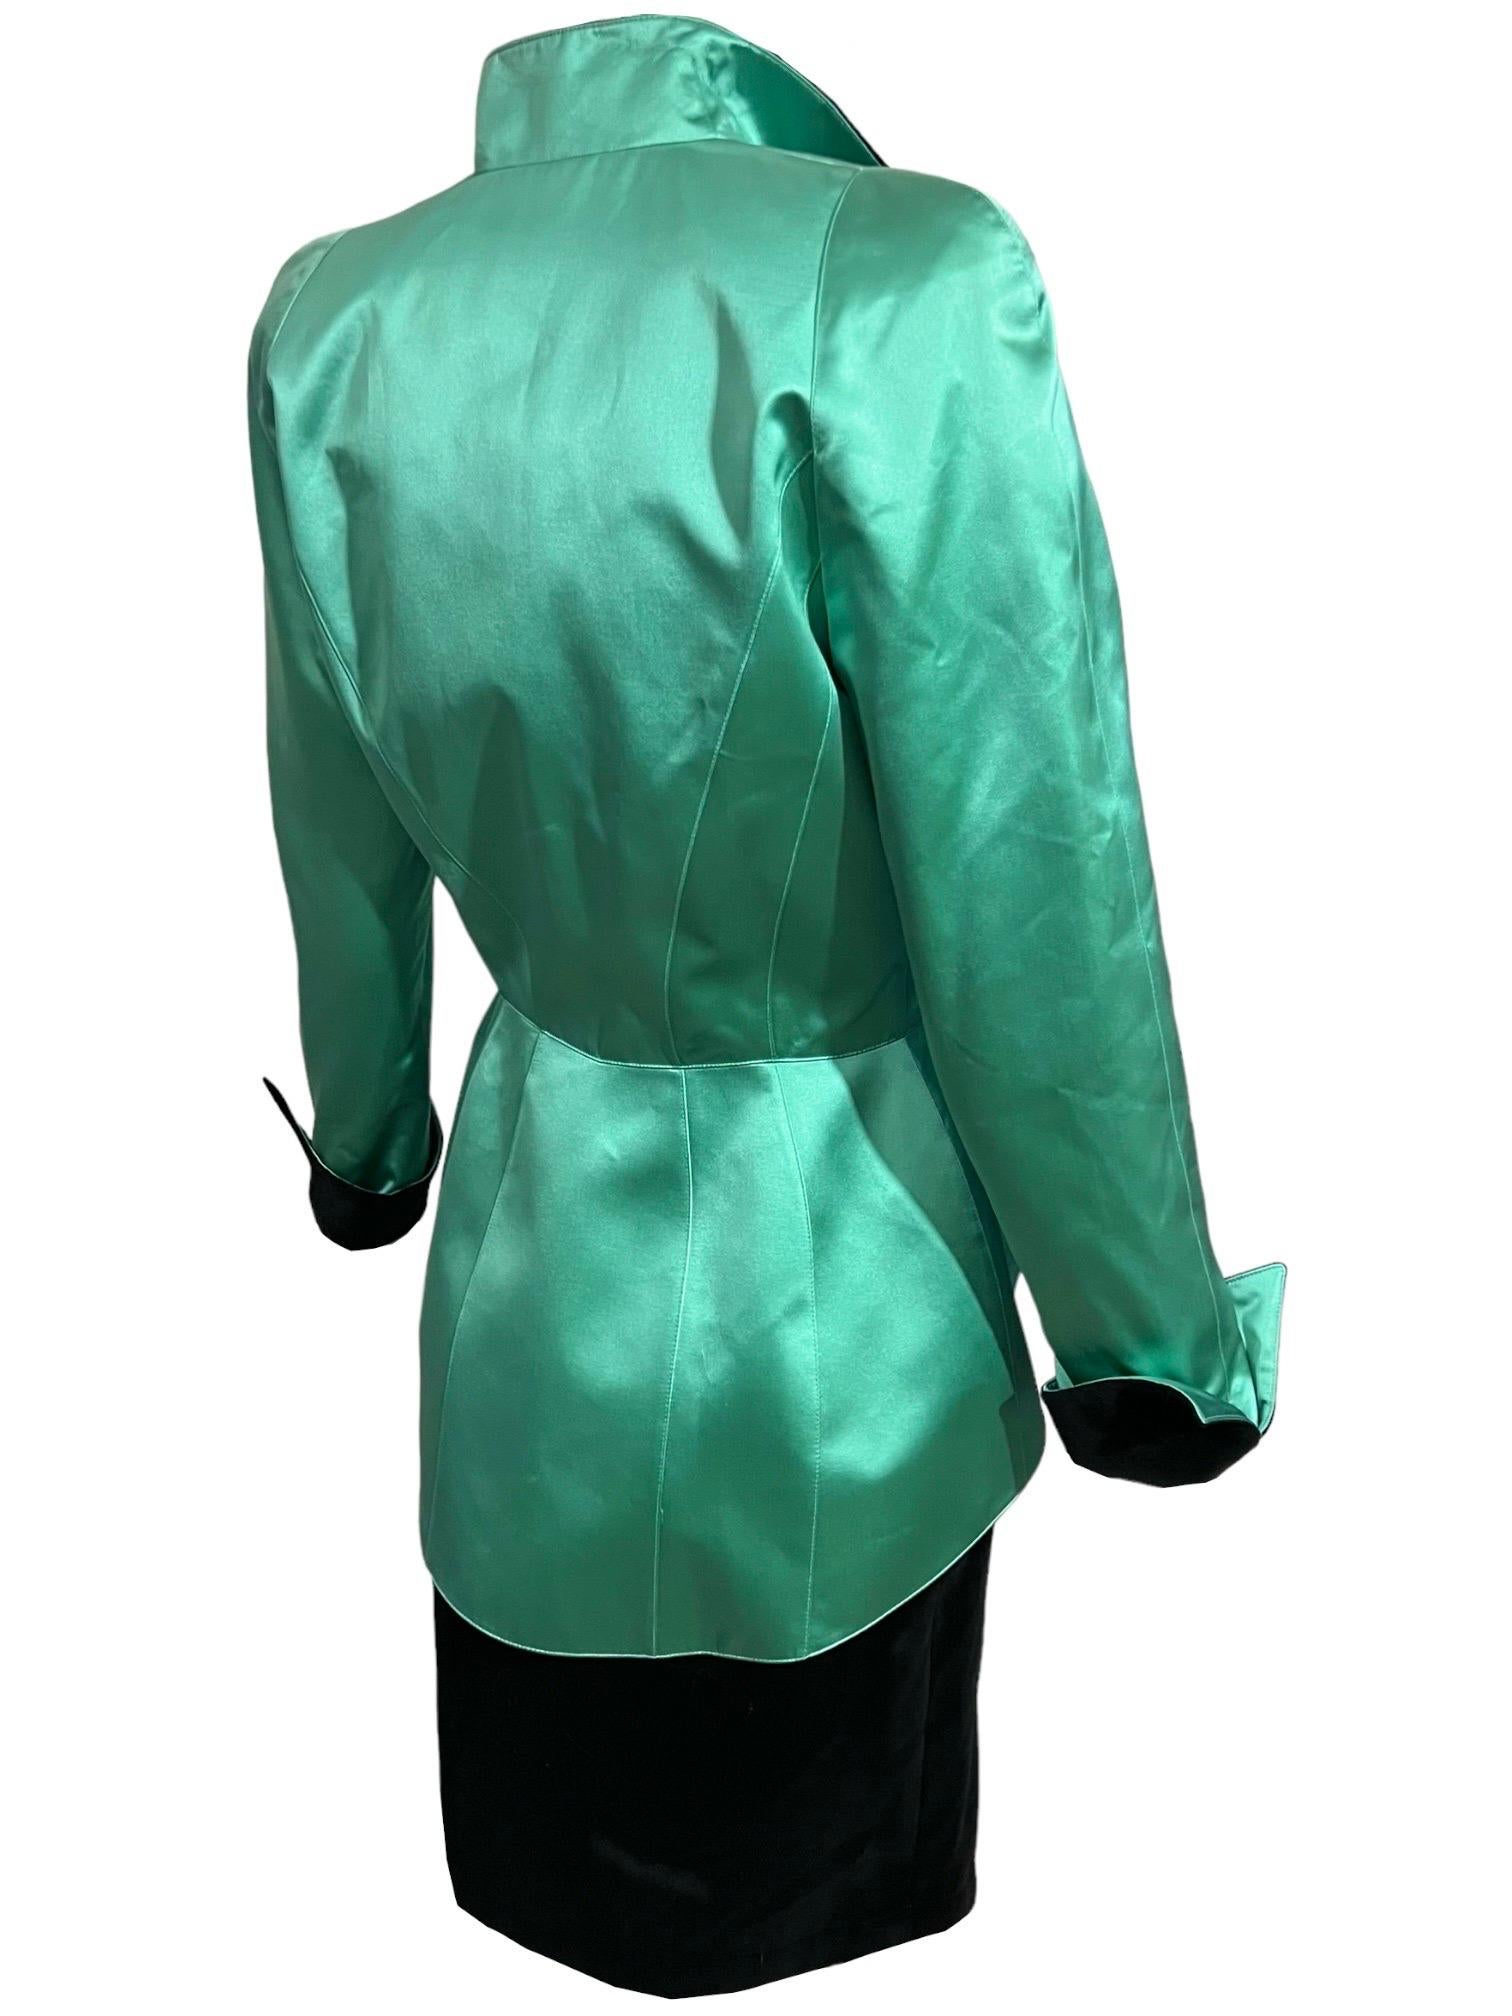 F/W 1996 Thierry Mugler Green Silk Structural Runway Suit With Tags For Sale 6